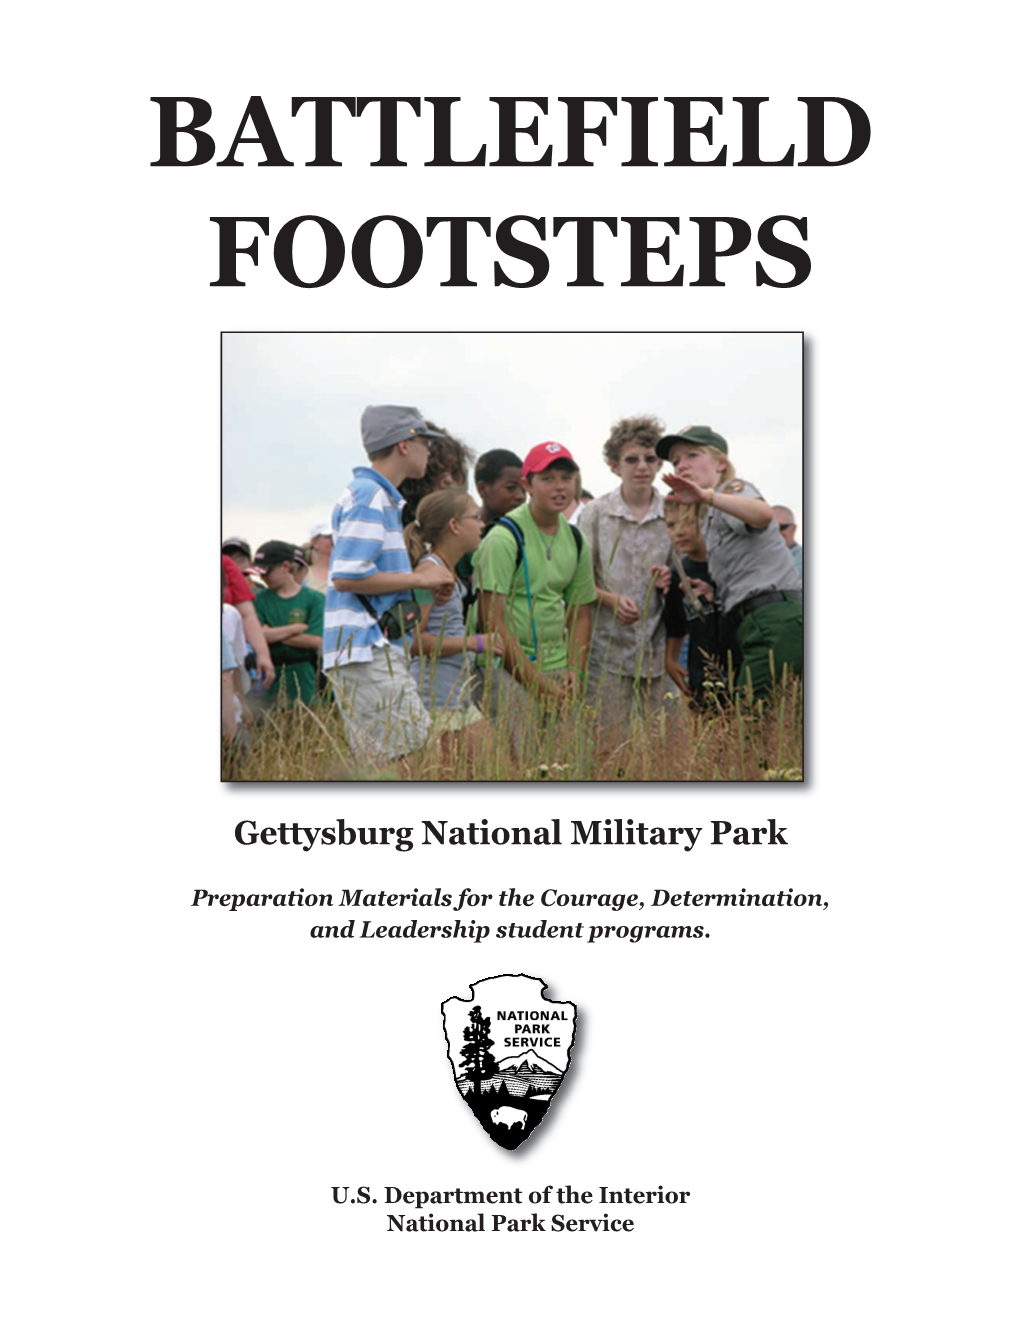 Battlefield Footsteps Programs Teacher and Student Guide